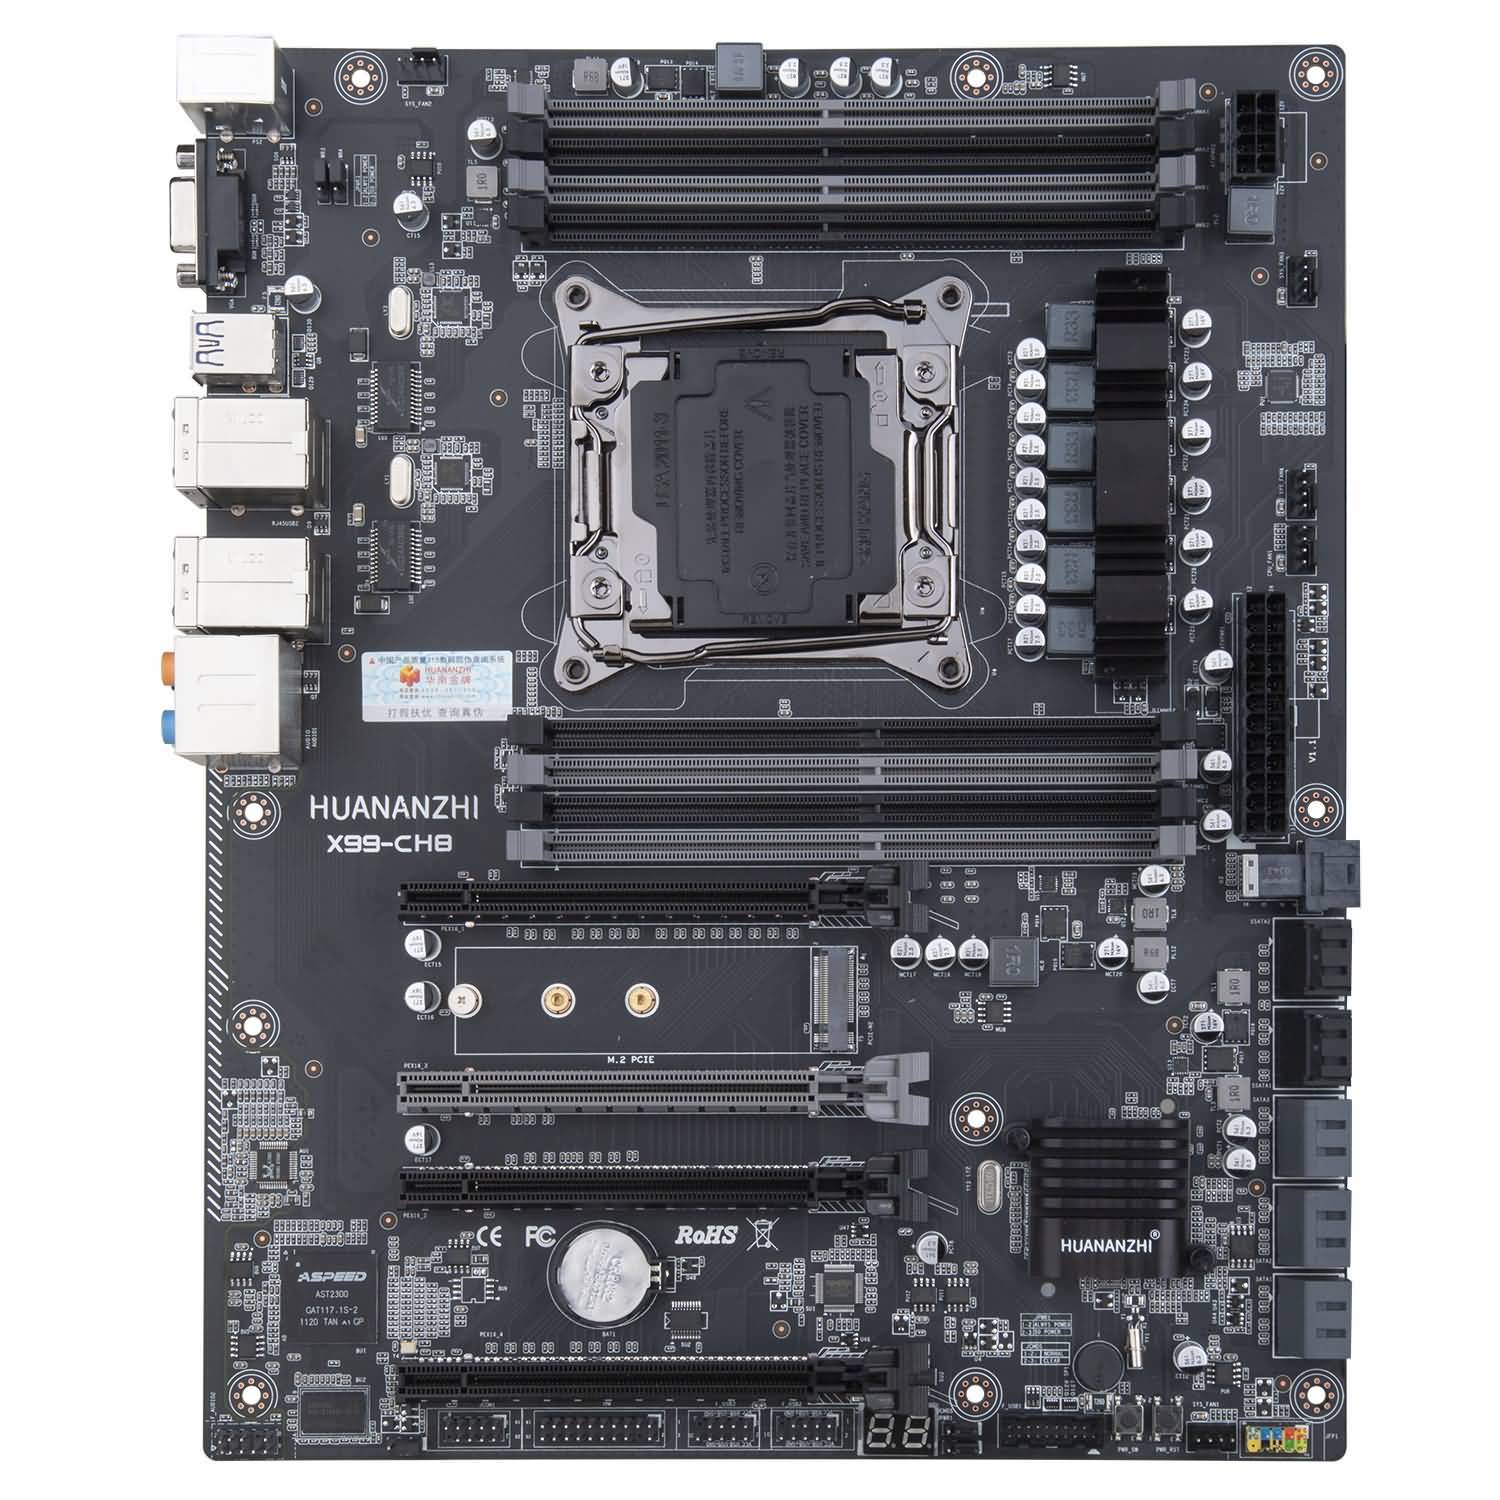 Download Huananzhi X99-CH8Motherboard Free